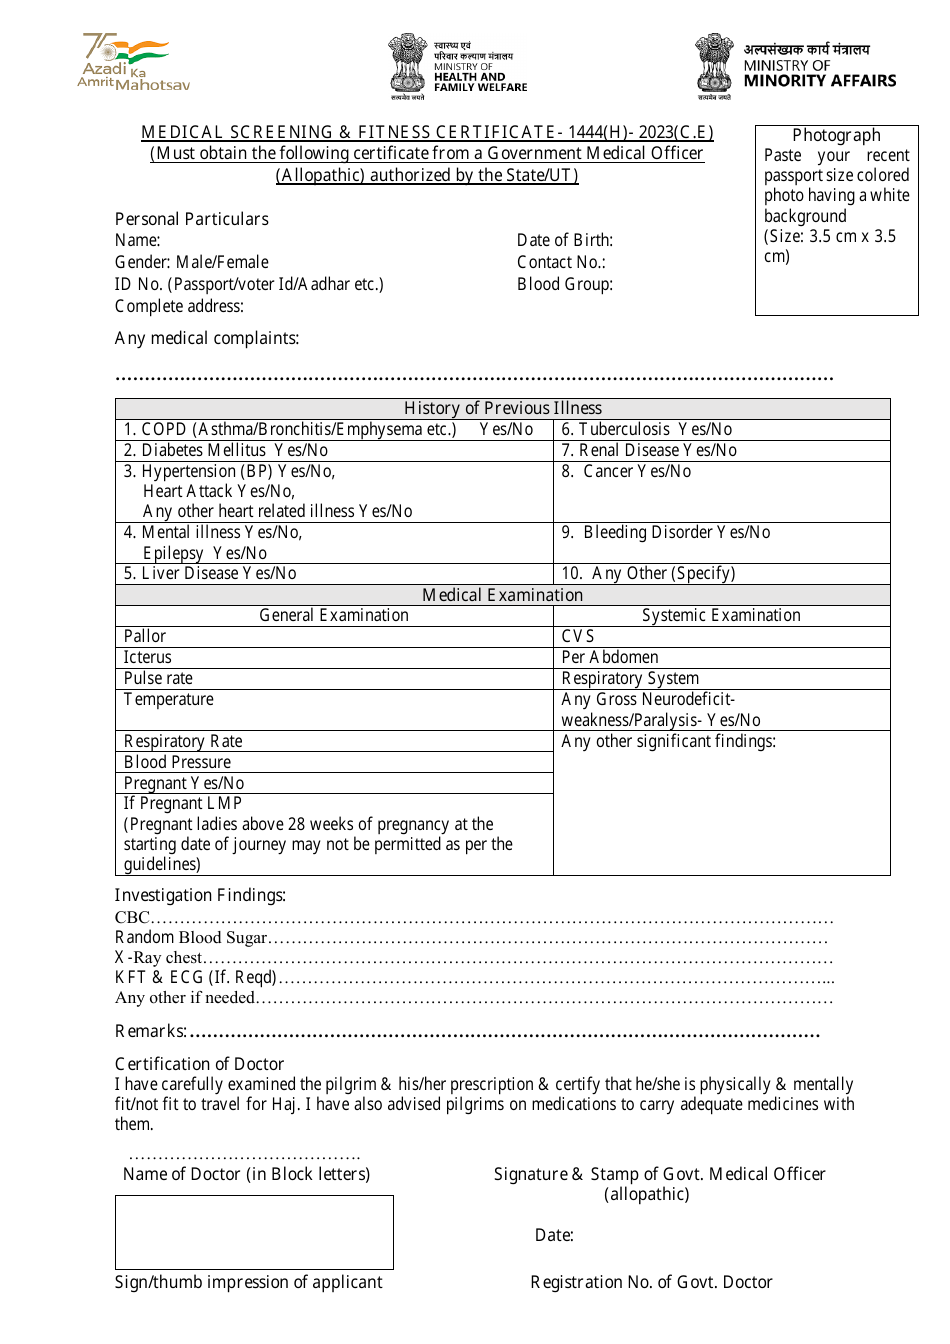 Medical Screening  Fitness Certificate - India, Page 1